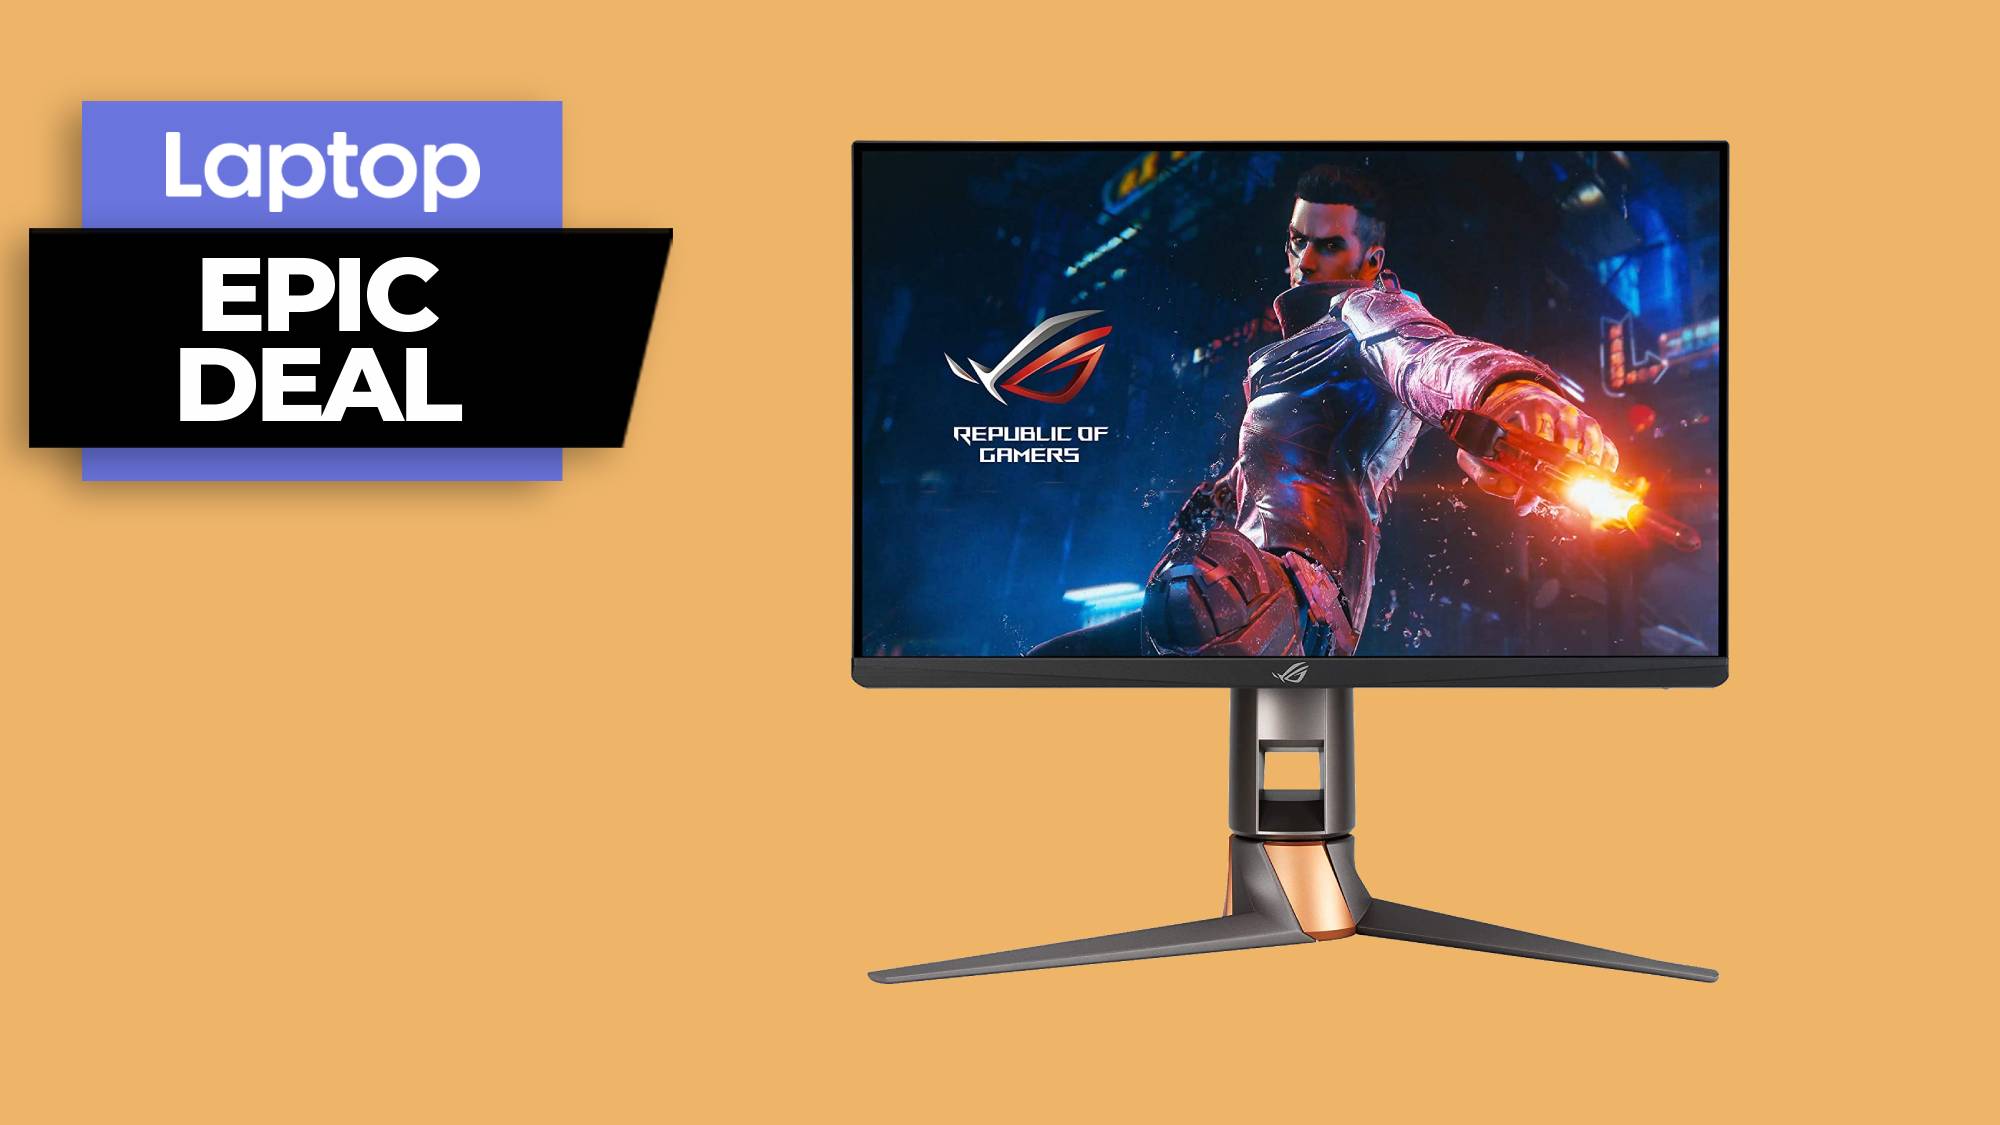 The Asus Rog Swift 360Hz offers 360Hz refresh rate and NVIDIA G-Sync support